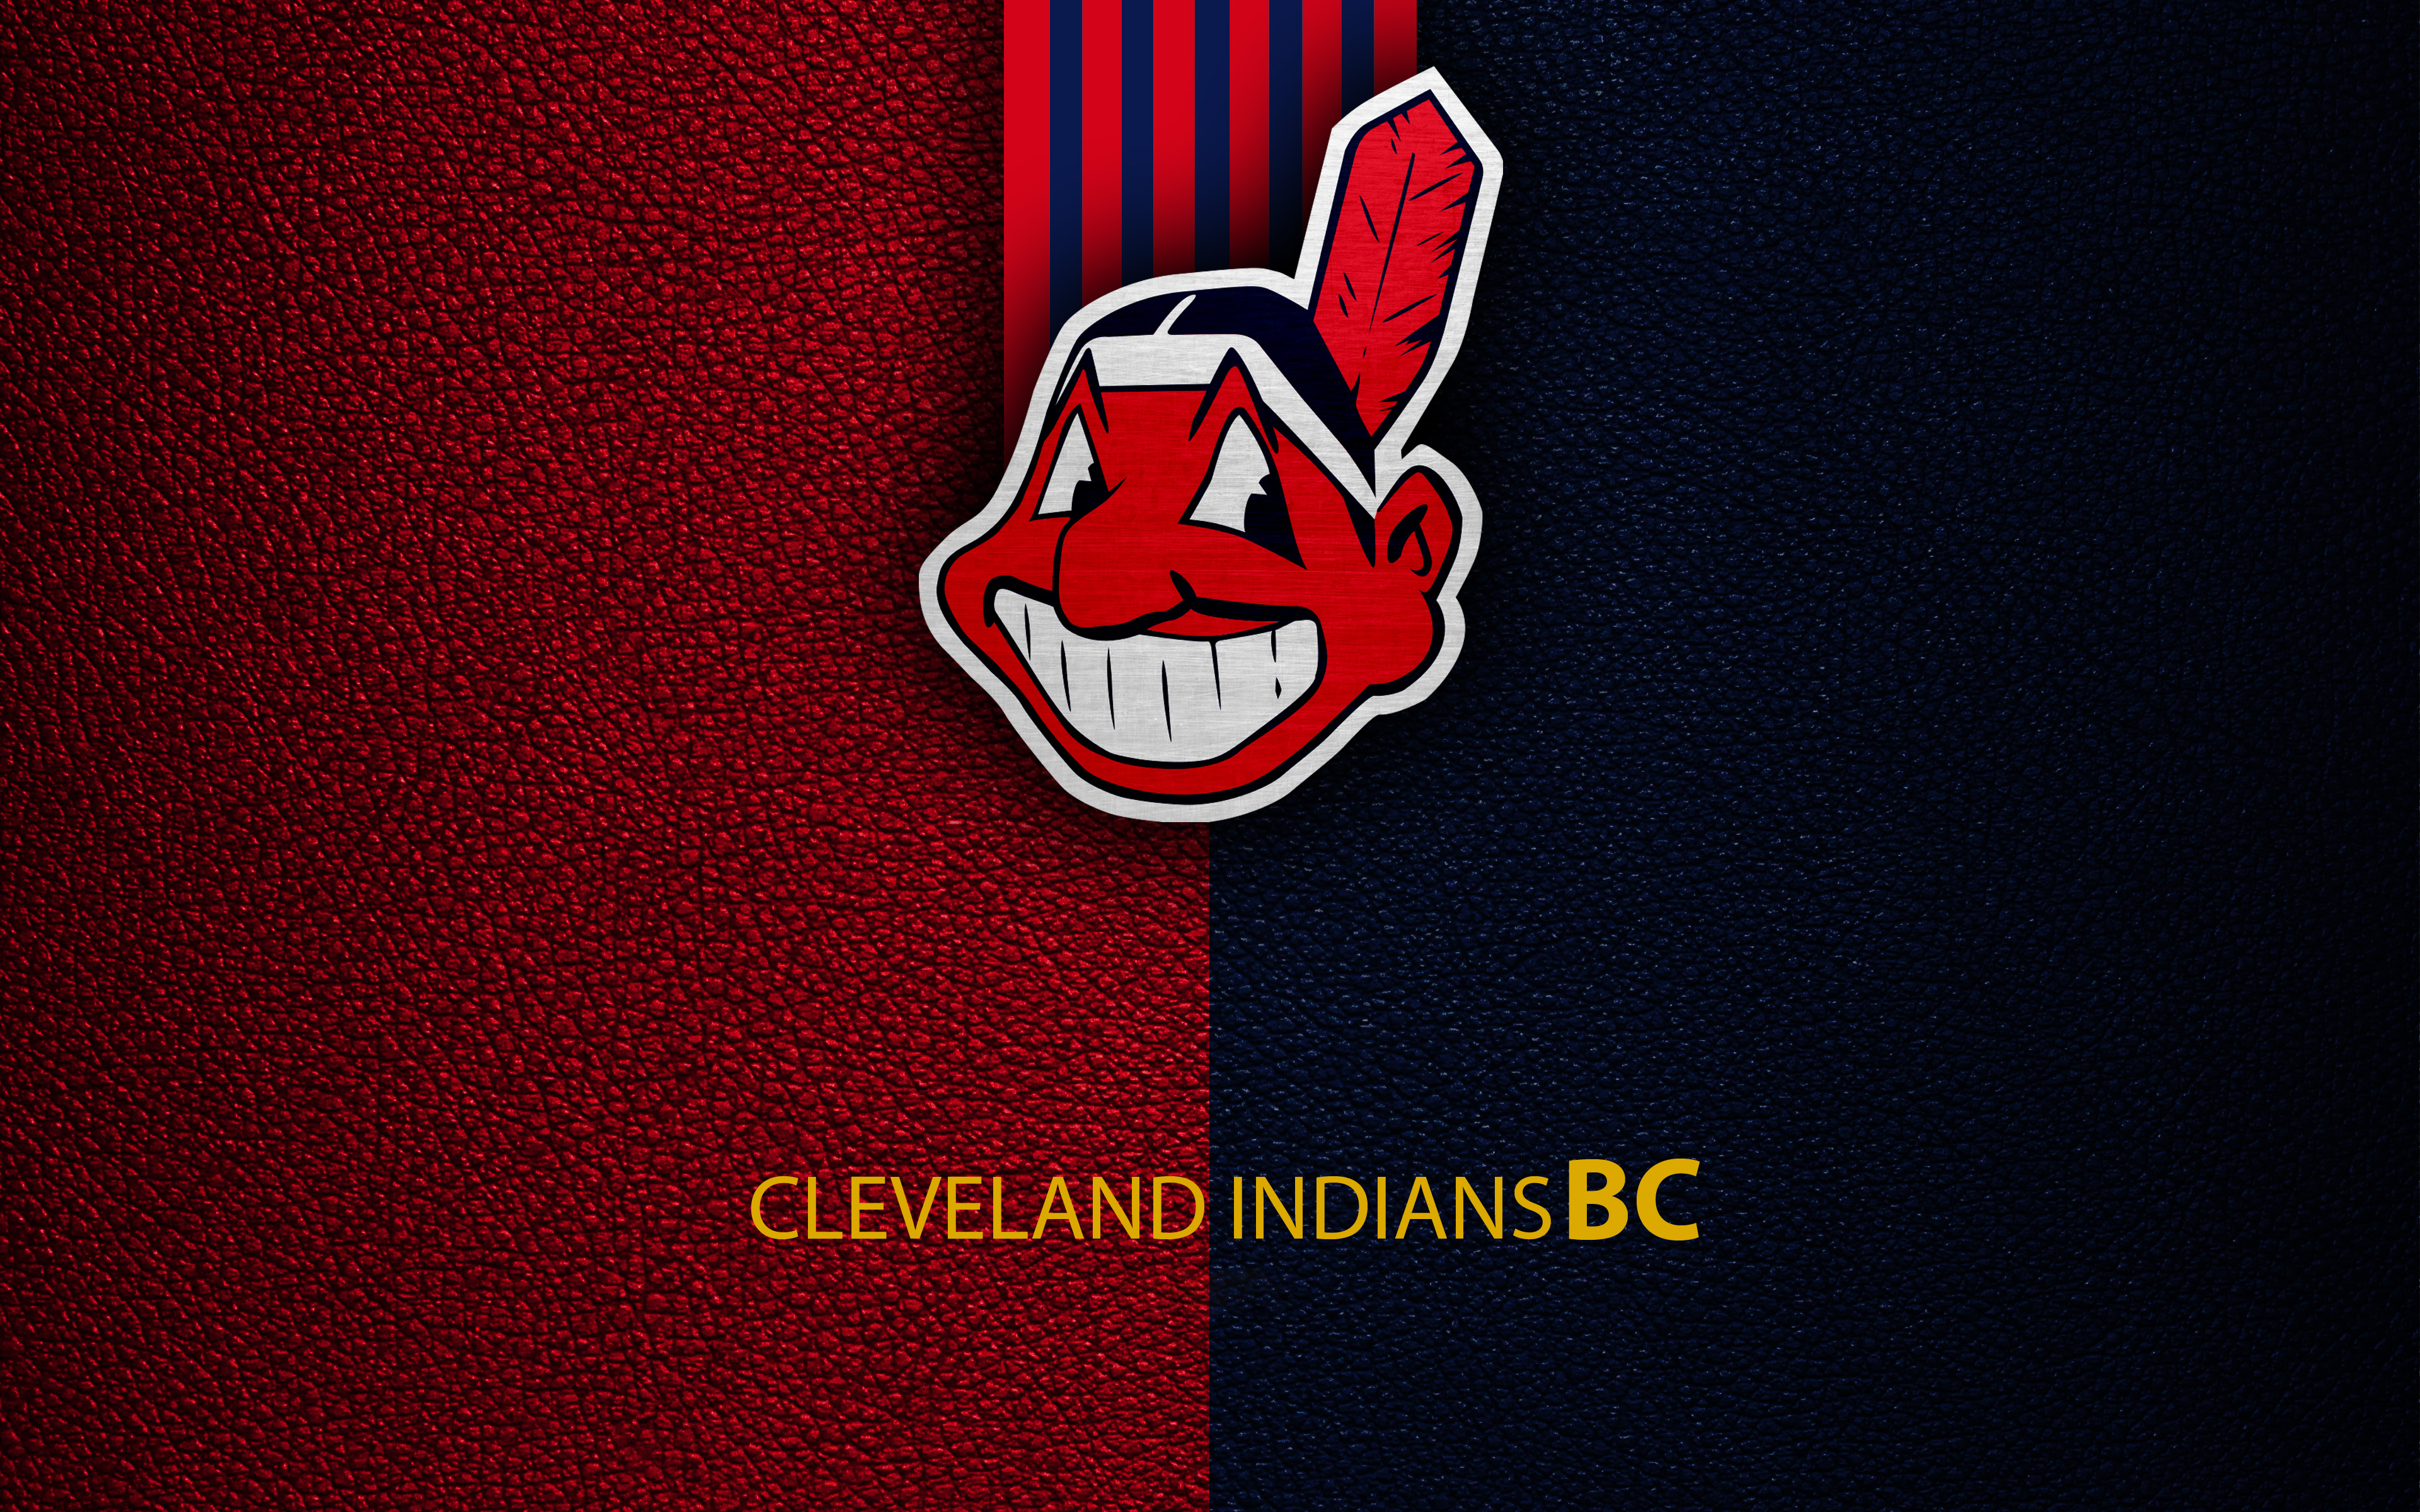 Cleveland Indians 4k Ultra Hd Wallpaper Background Image 3840x2400 Id 9013 Wallpaper Abyss